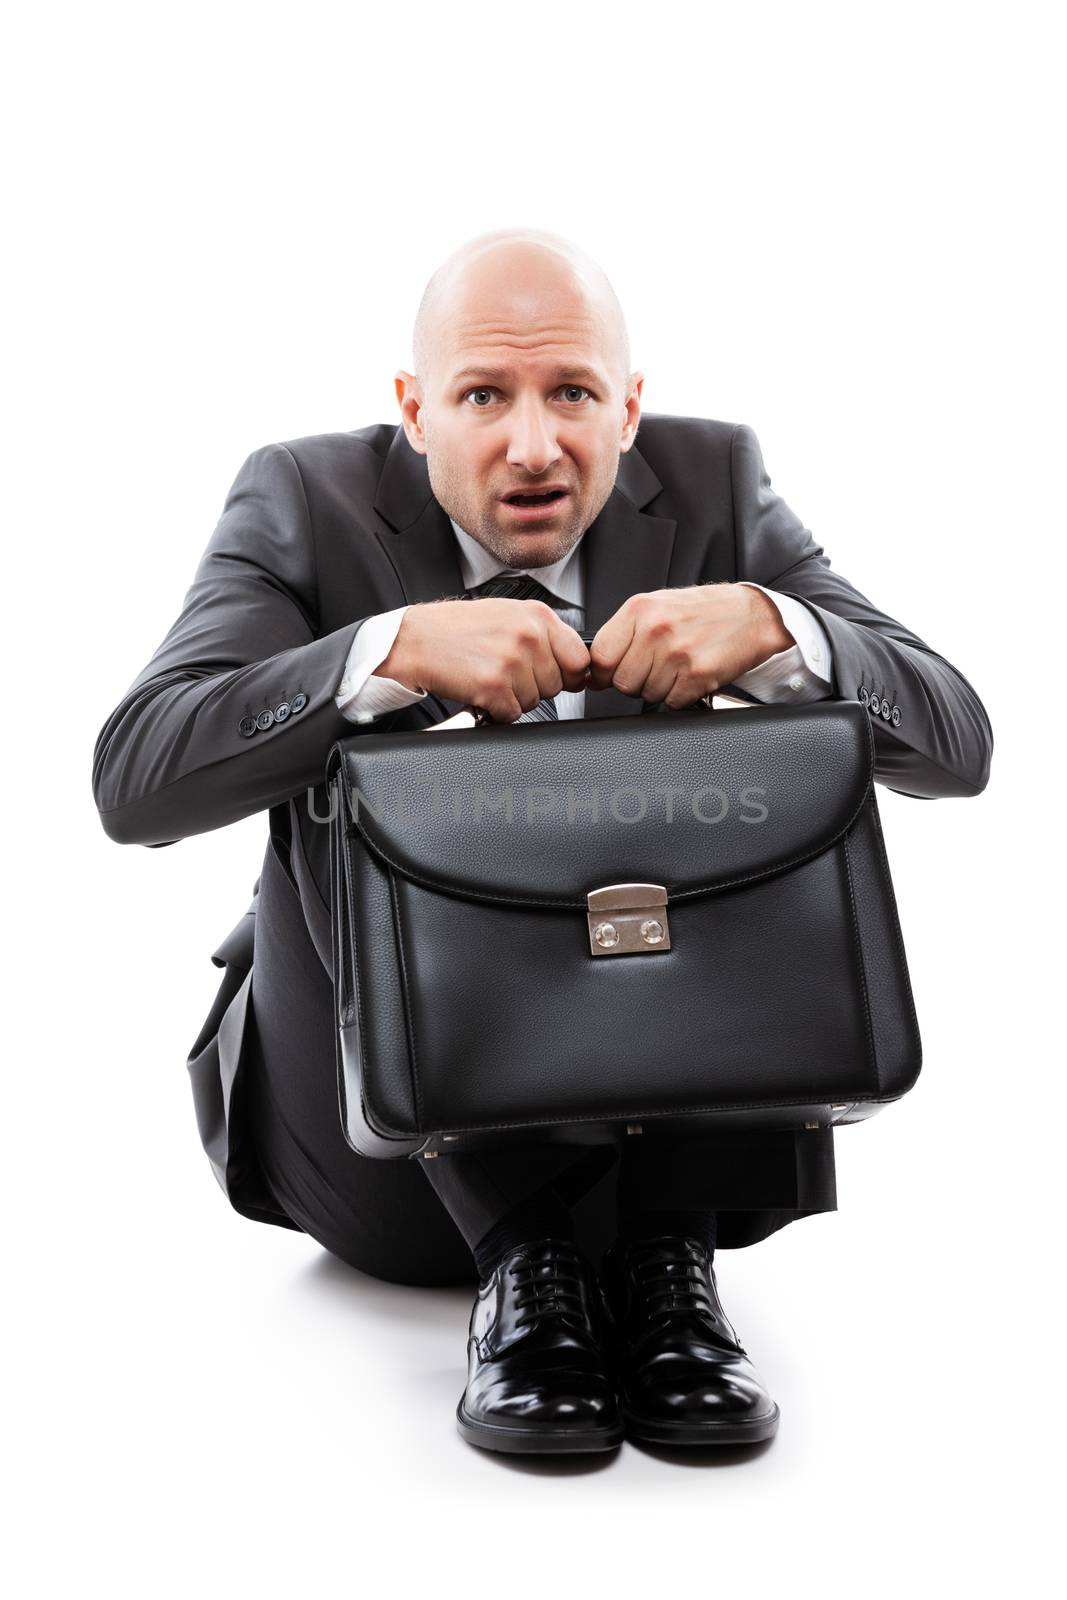 Unhappy scared or terrified businessman in depression hand holding briefcase by ia_64